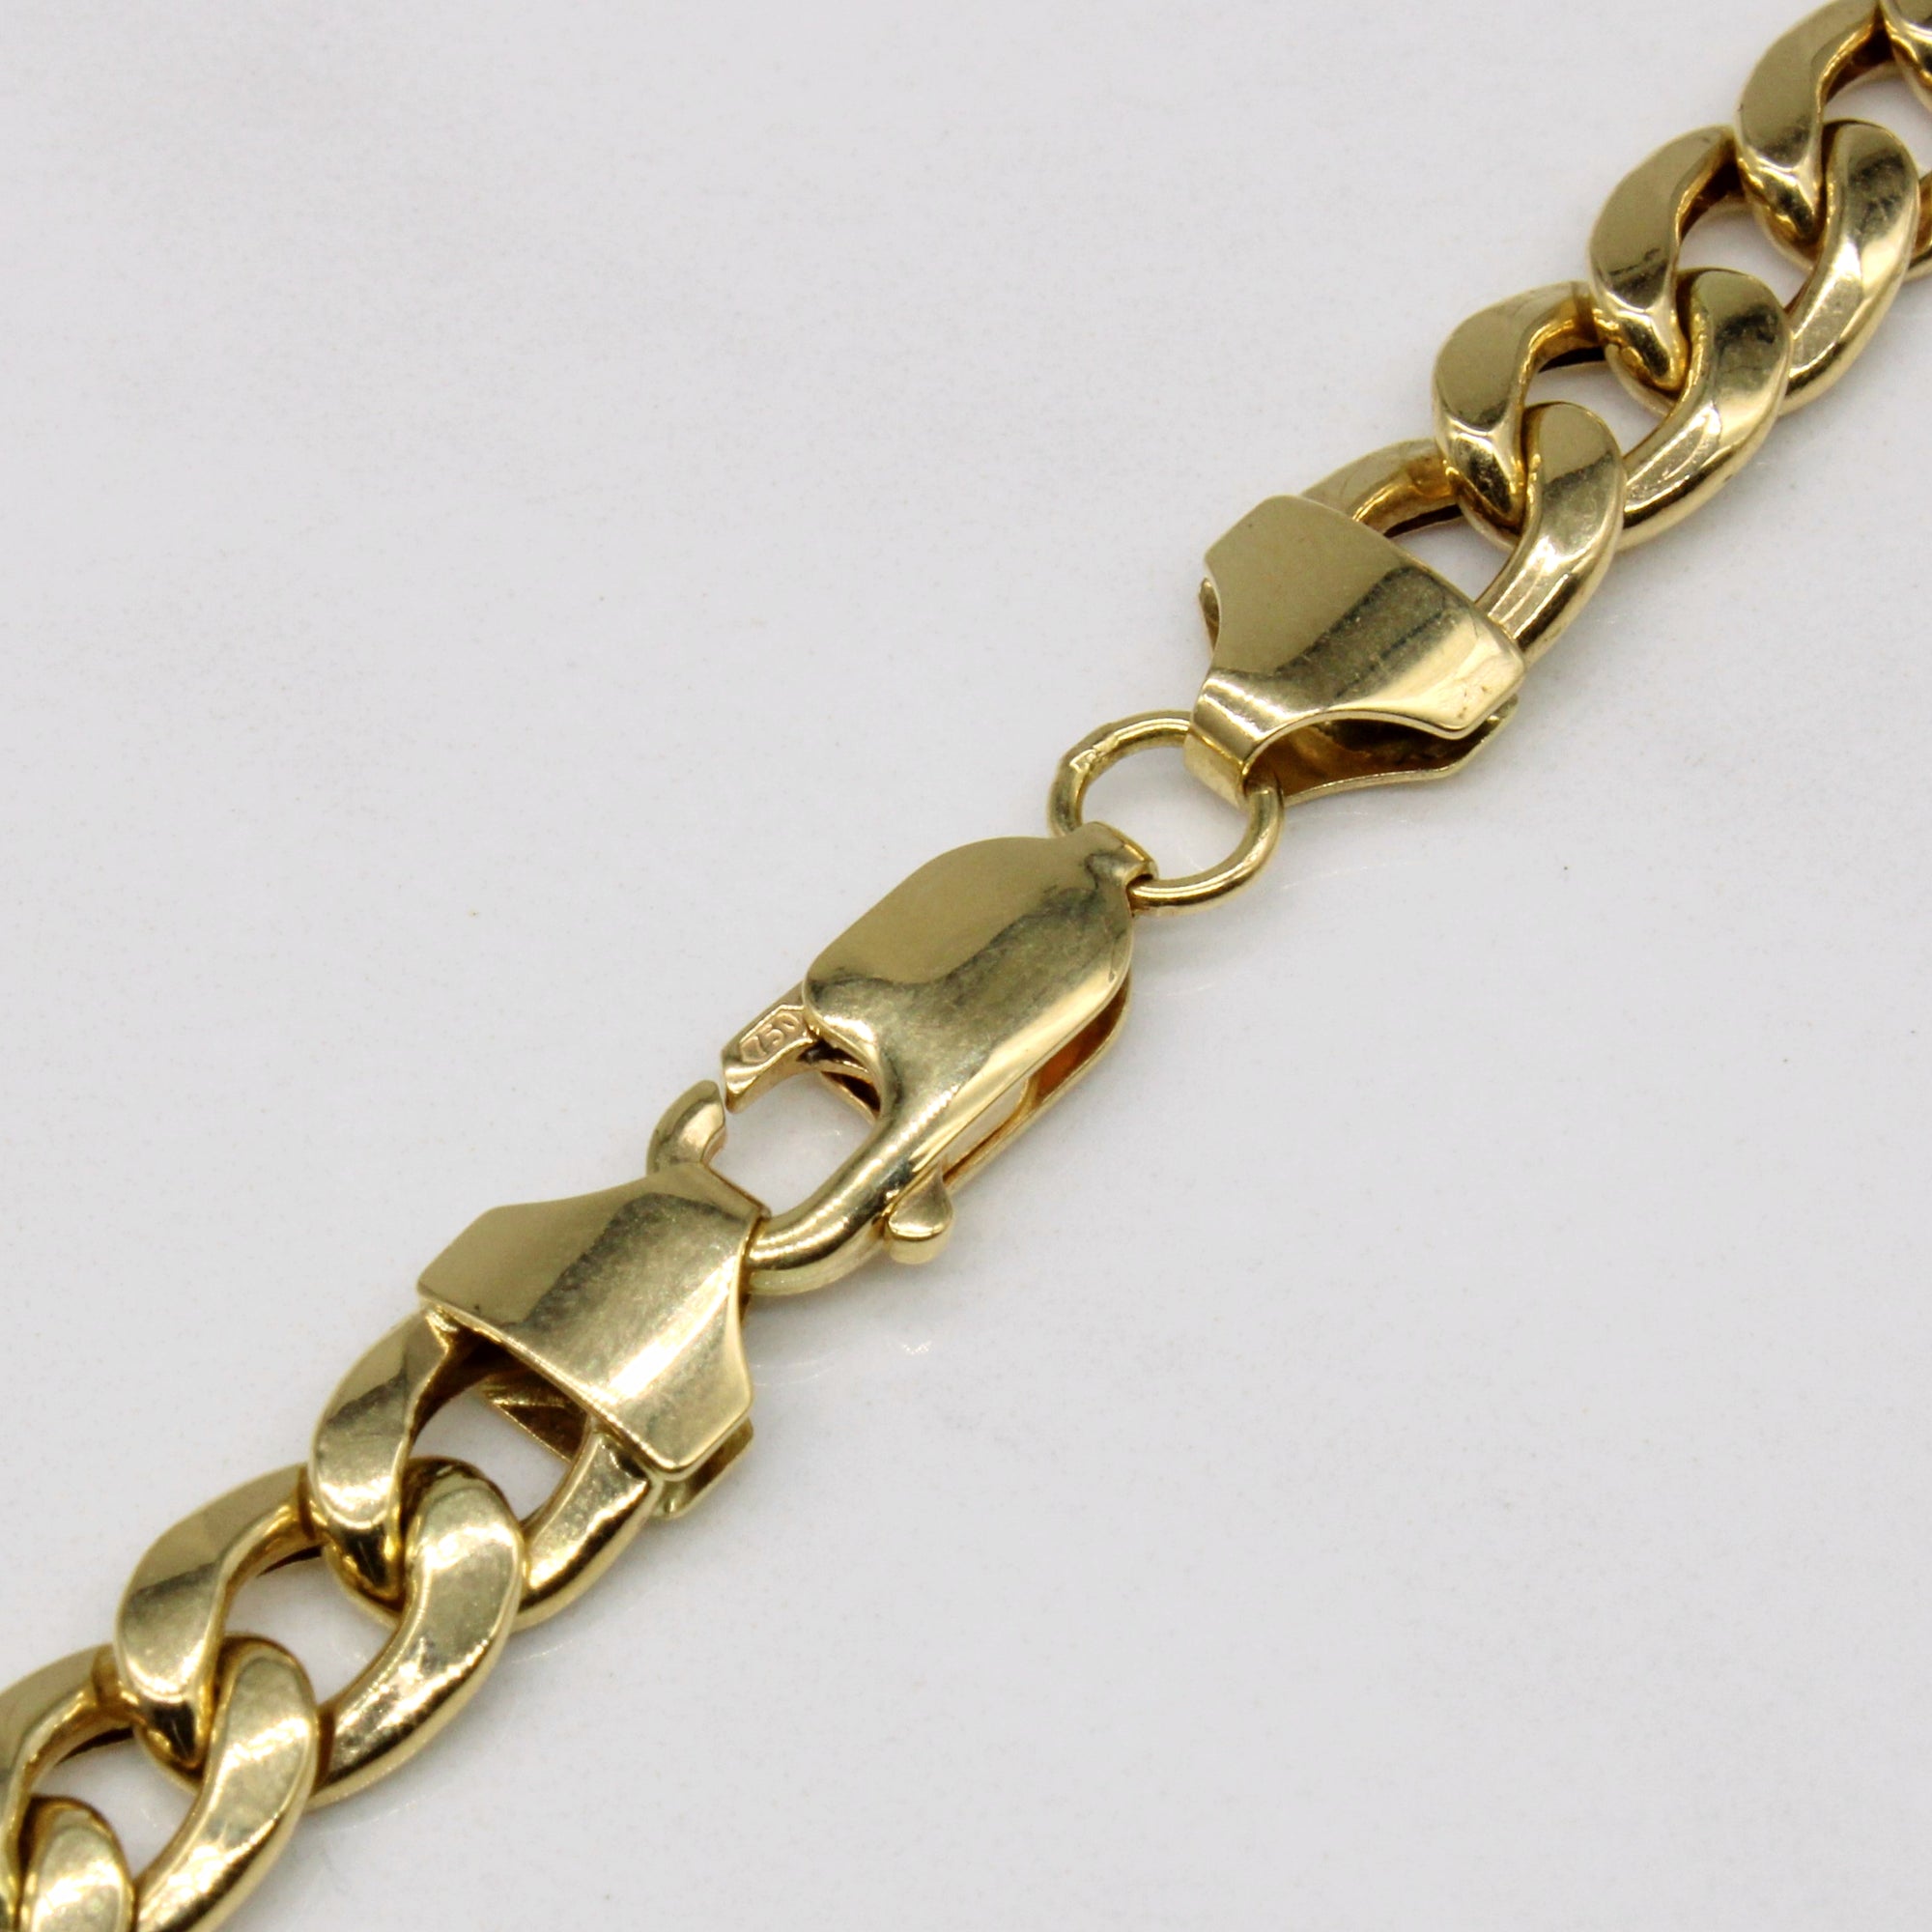 18k Yellow Gold Curb Link Chain | 20